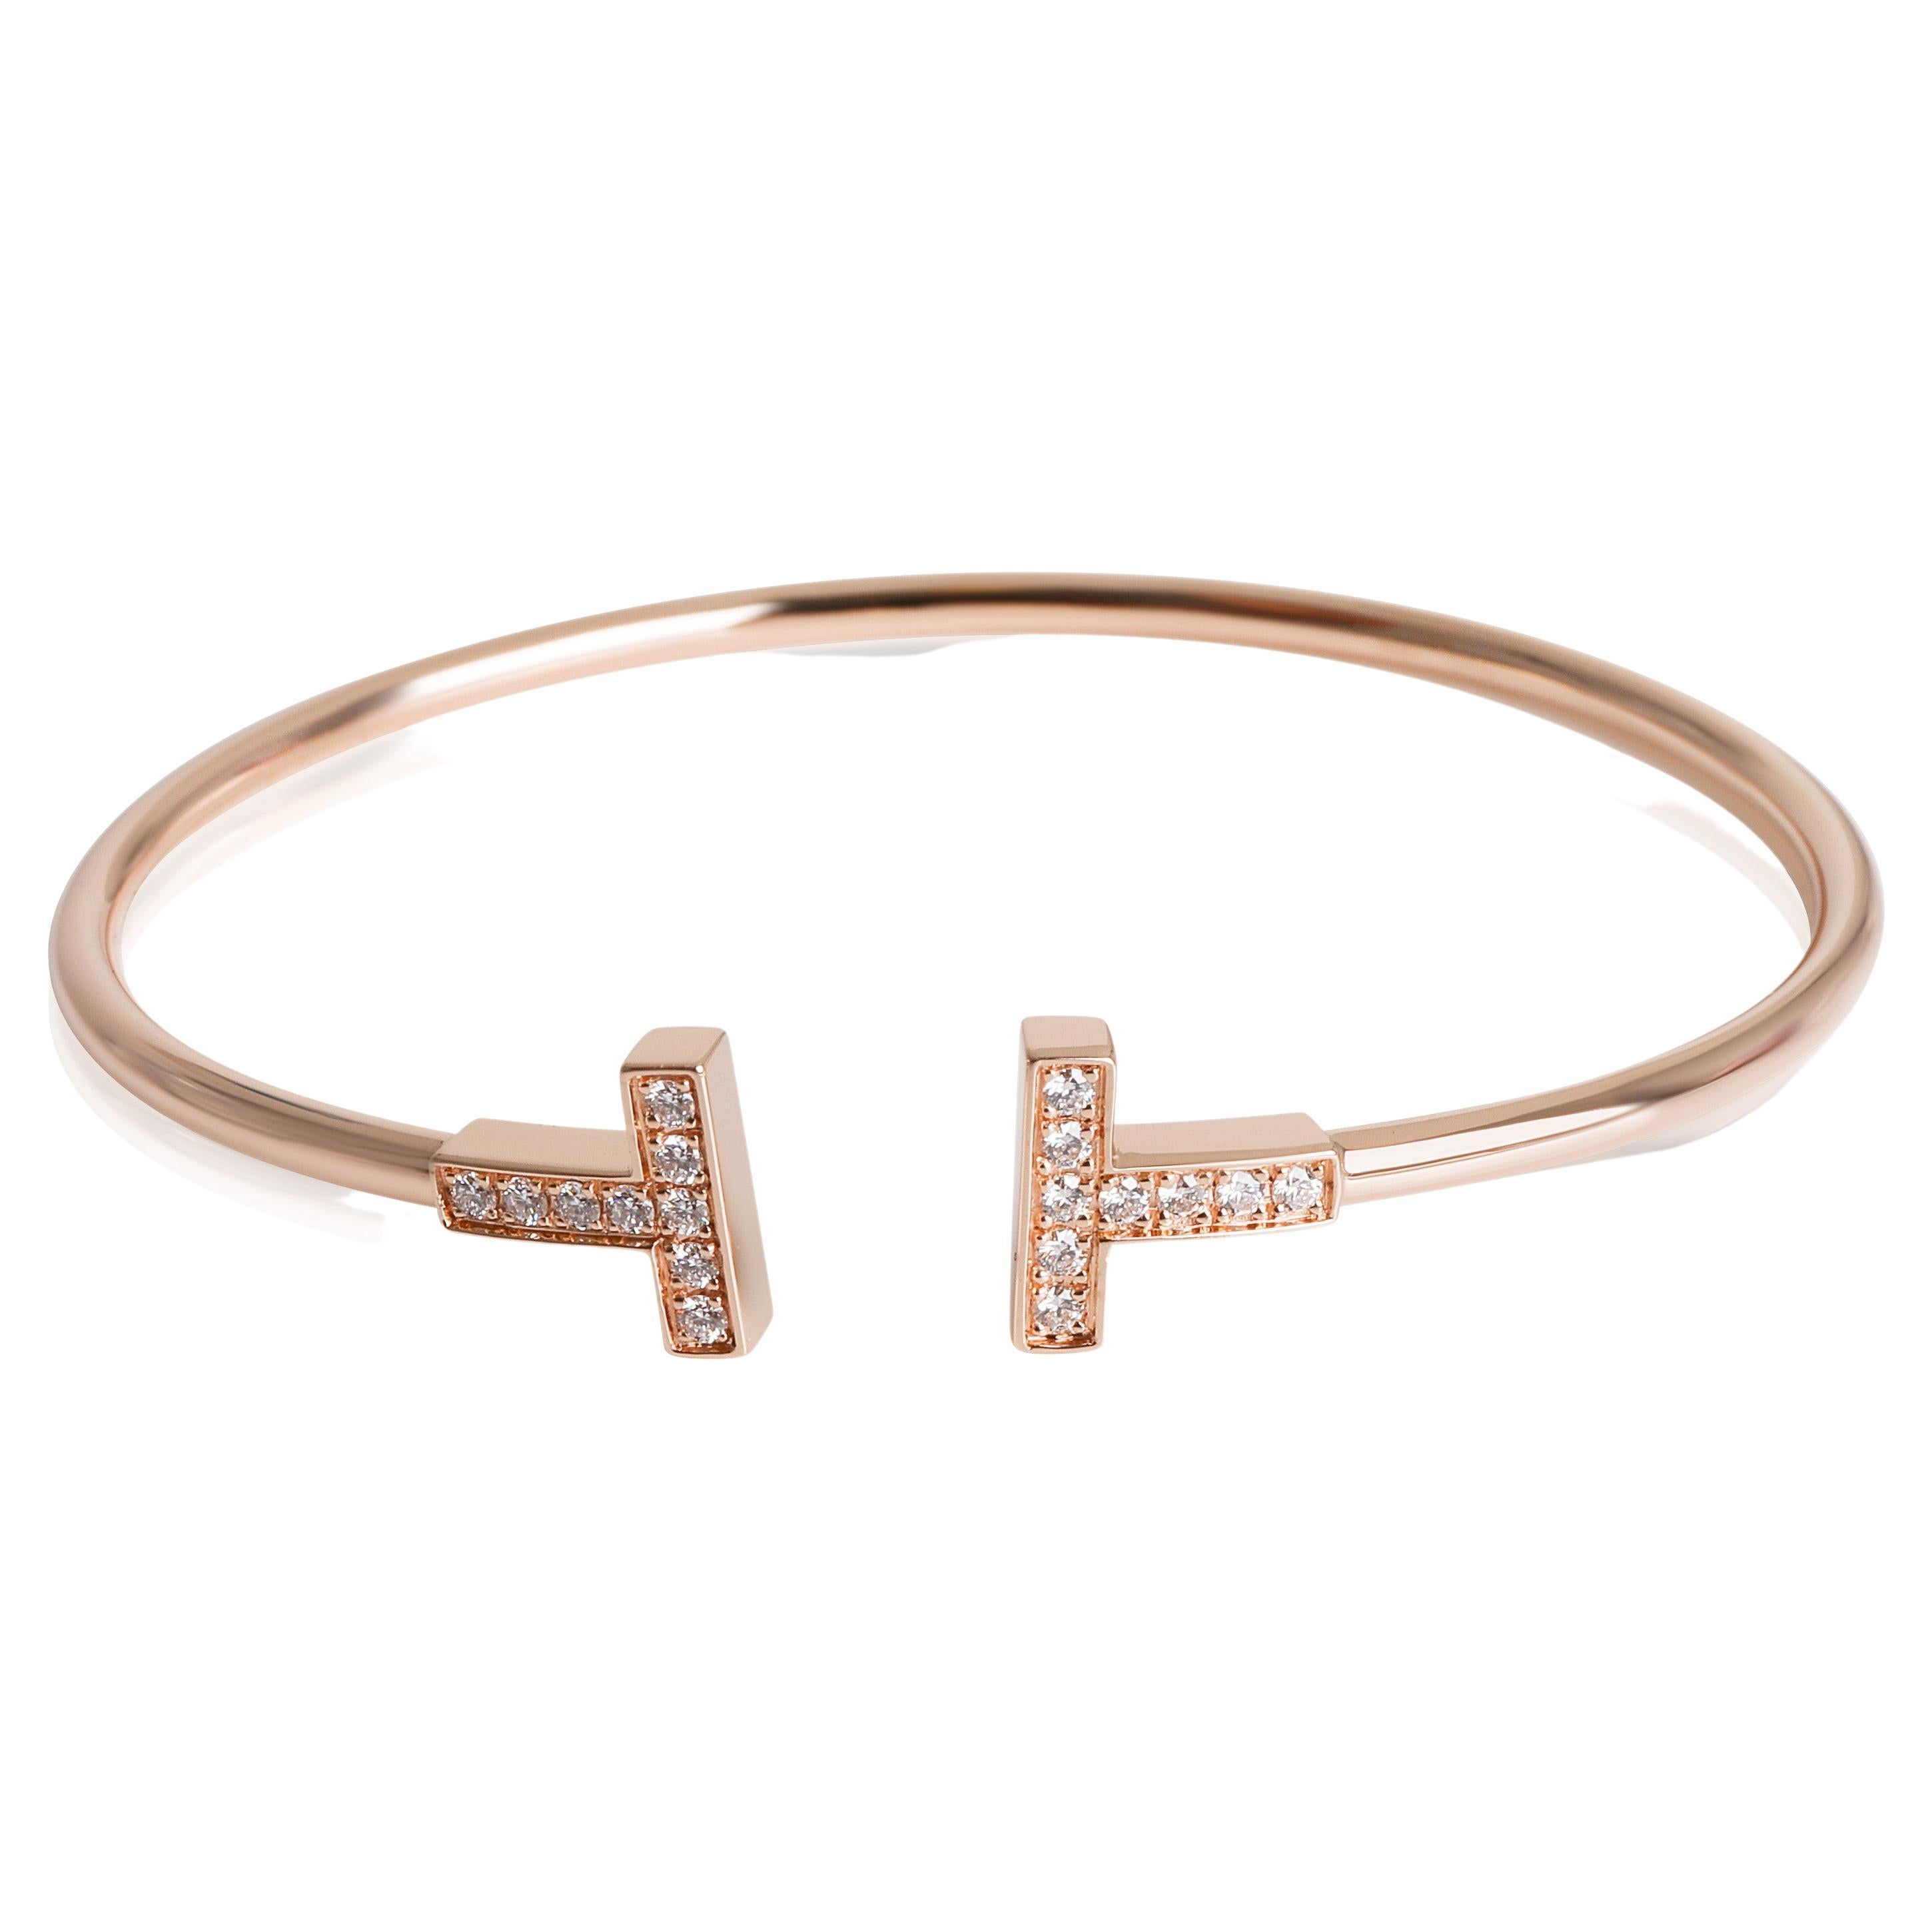 Tiffany and Co. 18k Yellow, Rose Gold and Silver 1837 Bangle Bracelet ...